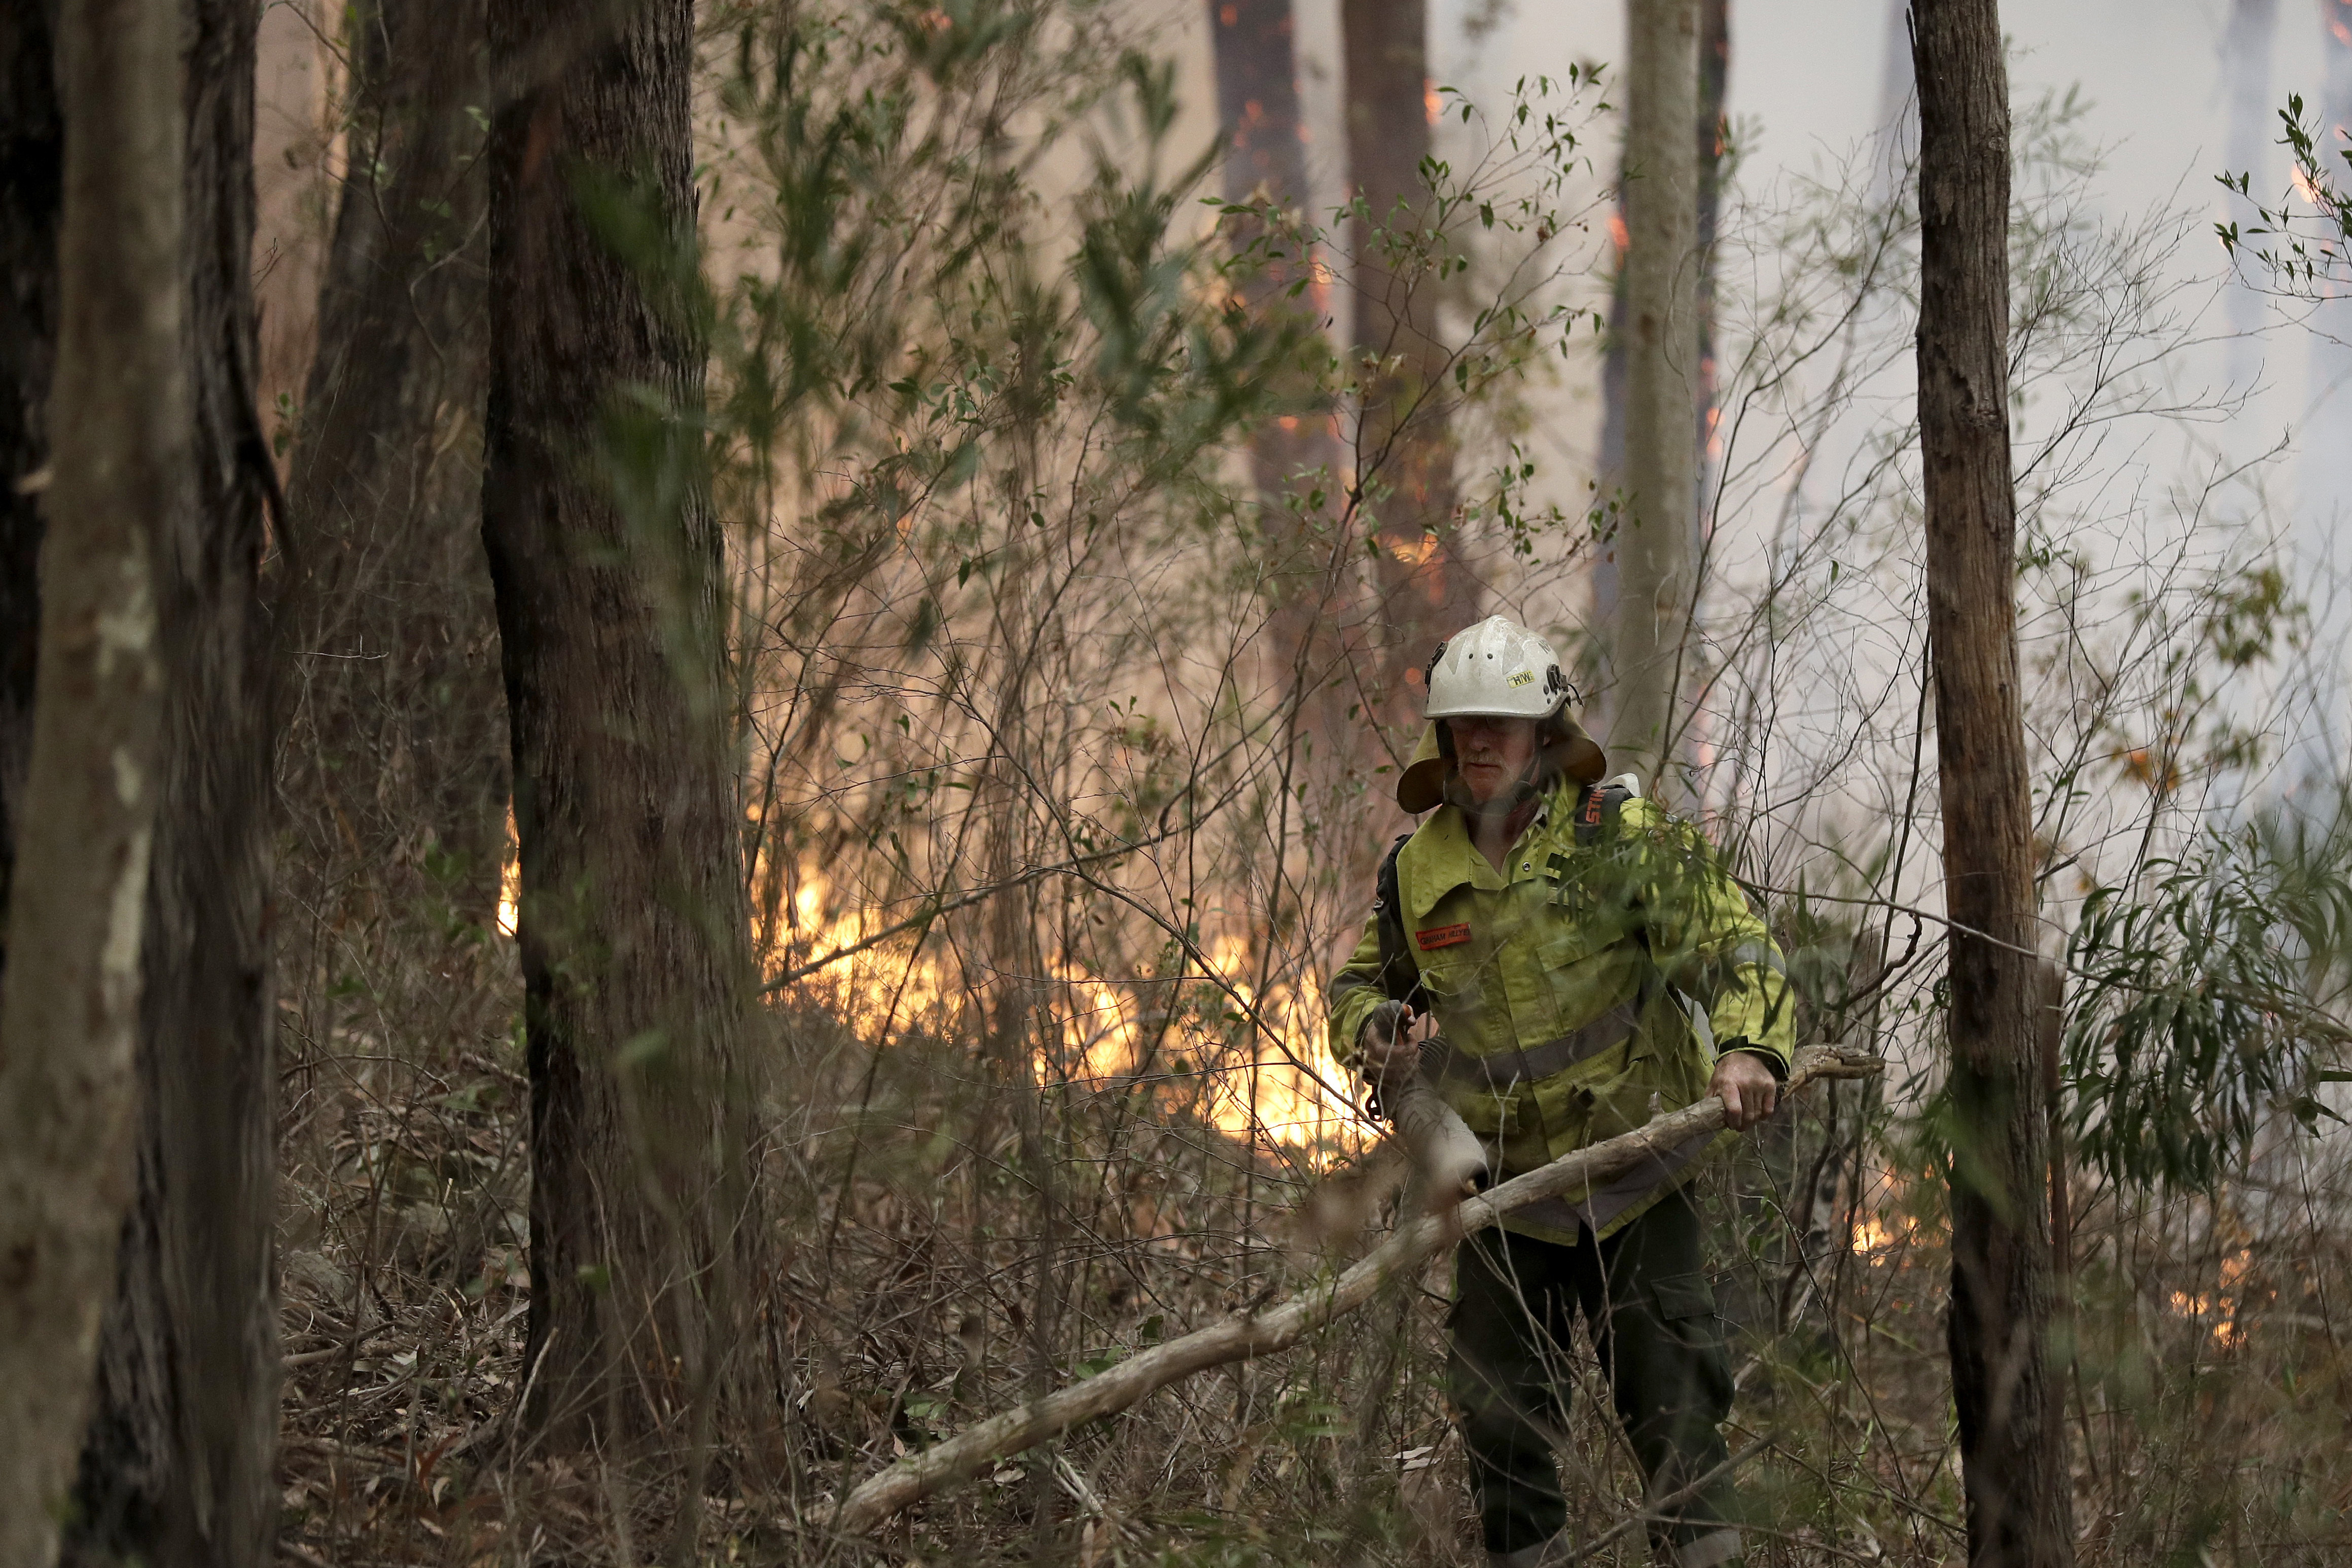 A firefighter keeps an eye on a controlled burn used to control a larger fire near Burrill Lake, Australia, Sunday, Jan. 5, 2020. Milder temperatures Sunday brought hope of a respite from wildfires that have ravaged three Australian states, destroying almost 2,000 homes. (AP Photo/Rick Rycroft)